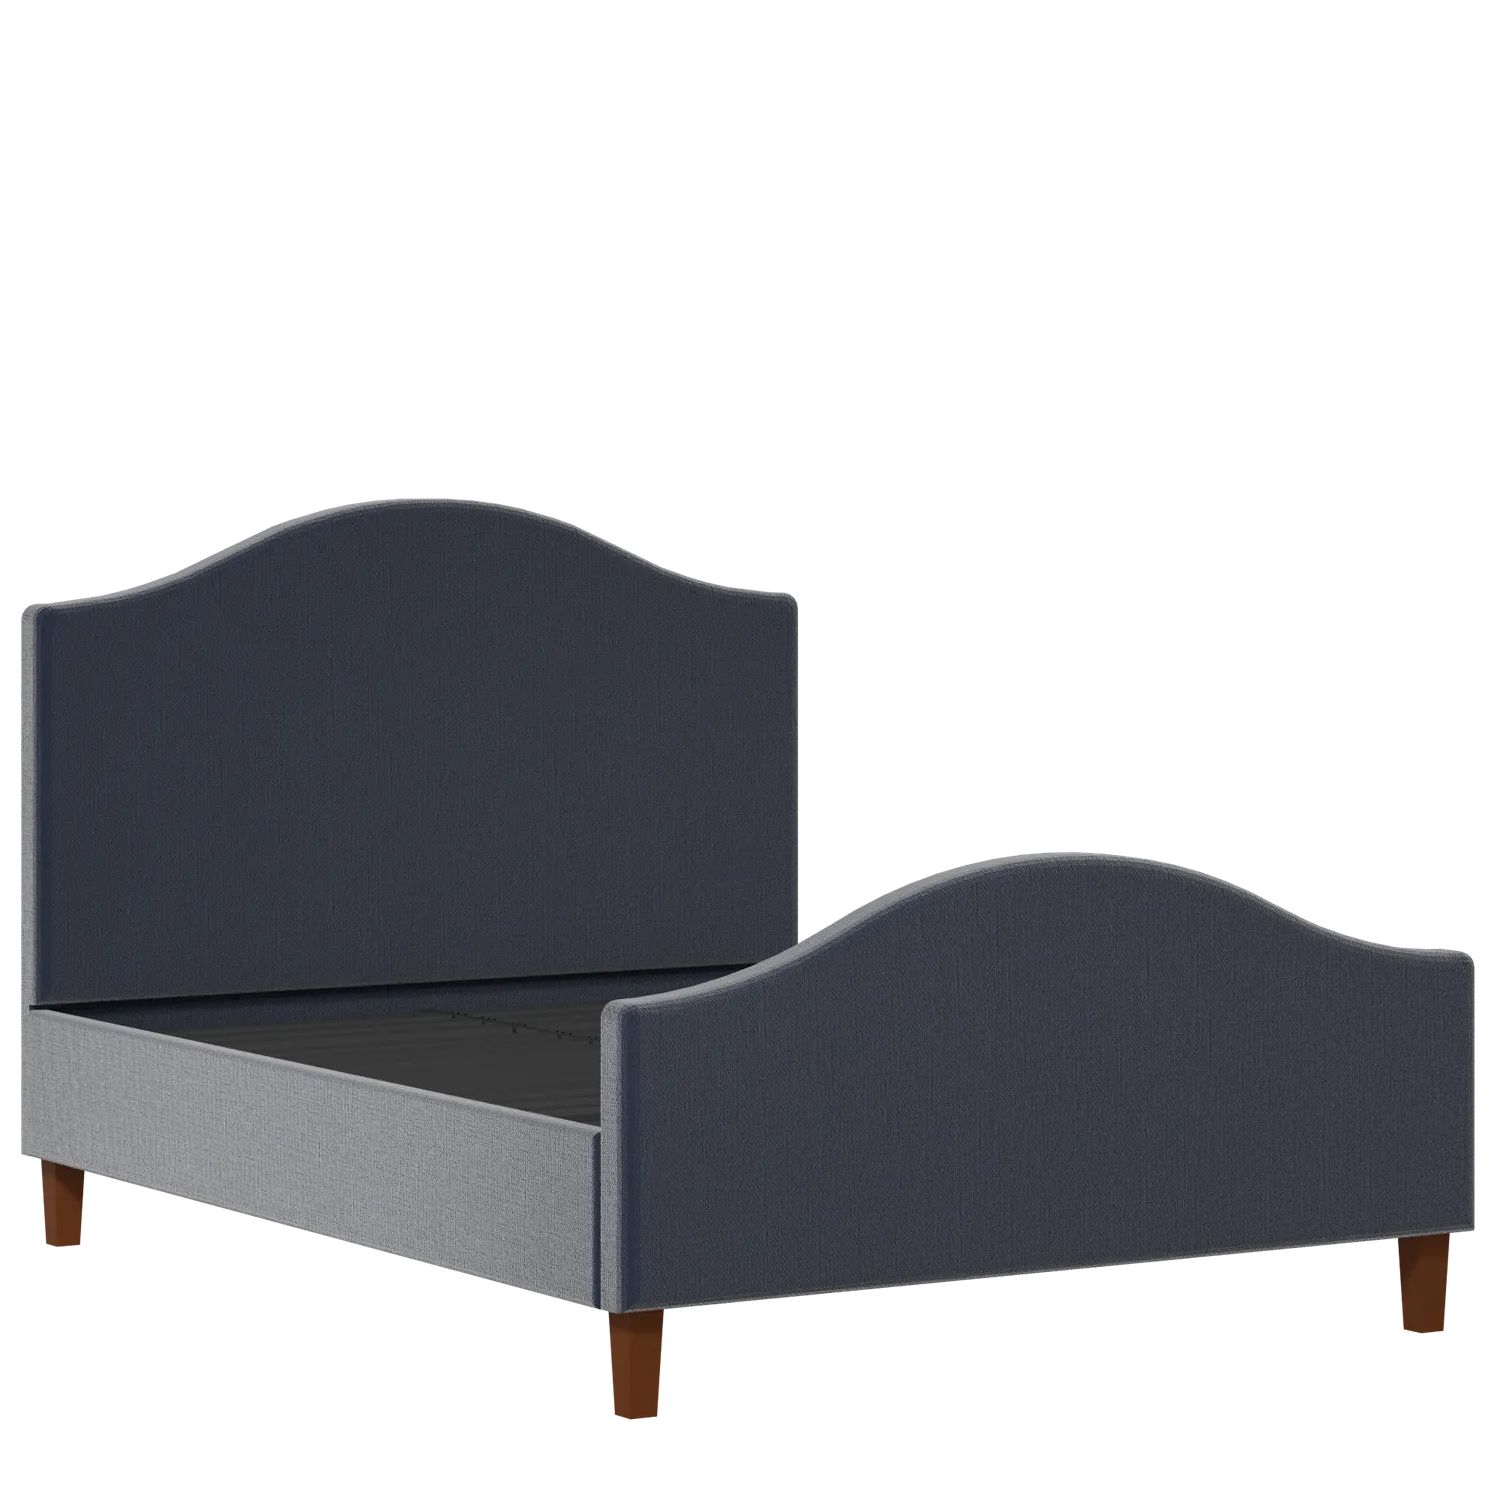 Burley upholstered bed in oxford blue fabric